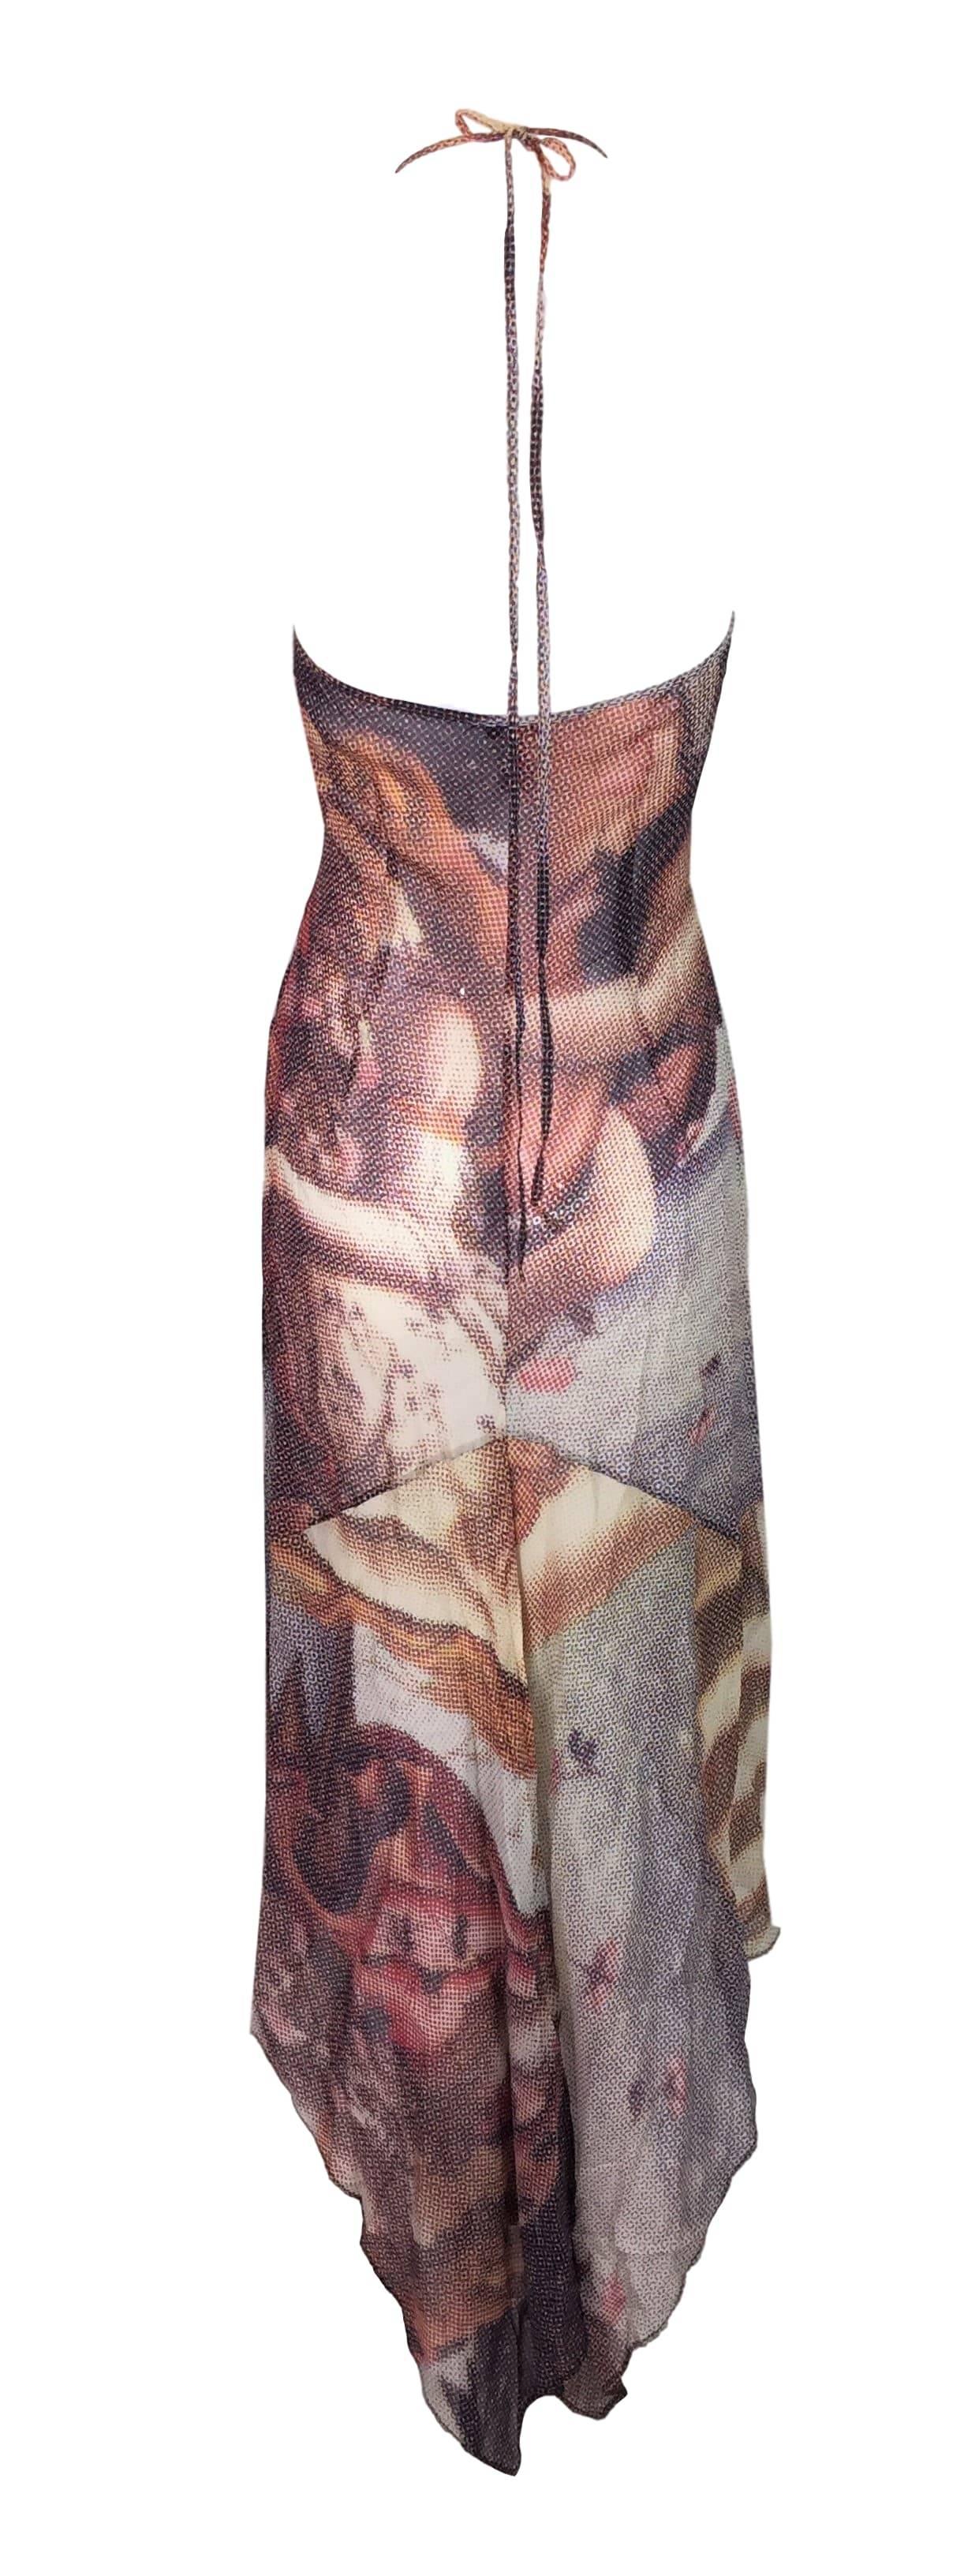 DESIGNER: 1990's D&G by Dolce & Gabbana- Botticelli's Birth of Venus print

Please contact for more information and/or photos.

CONDITION: Good- small imperfection on one strap

MATERIAL: Silk

COUNTRY MADE: Italy

SIZE: 26/40

MEASUREMENTS;